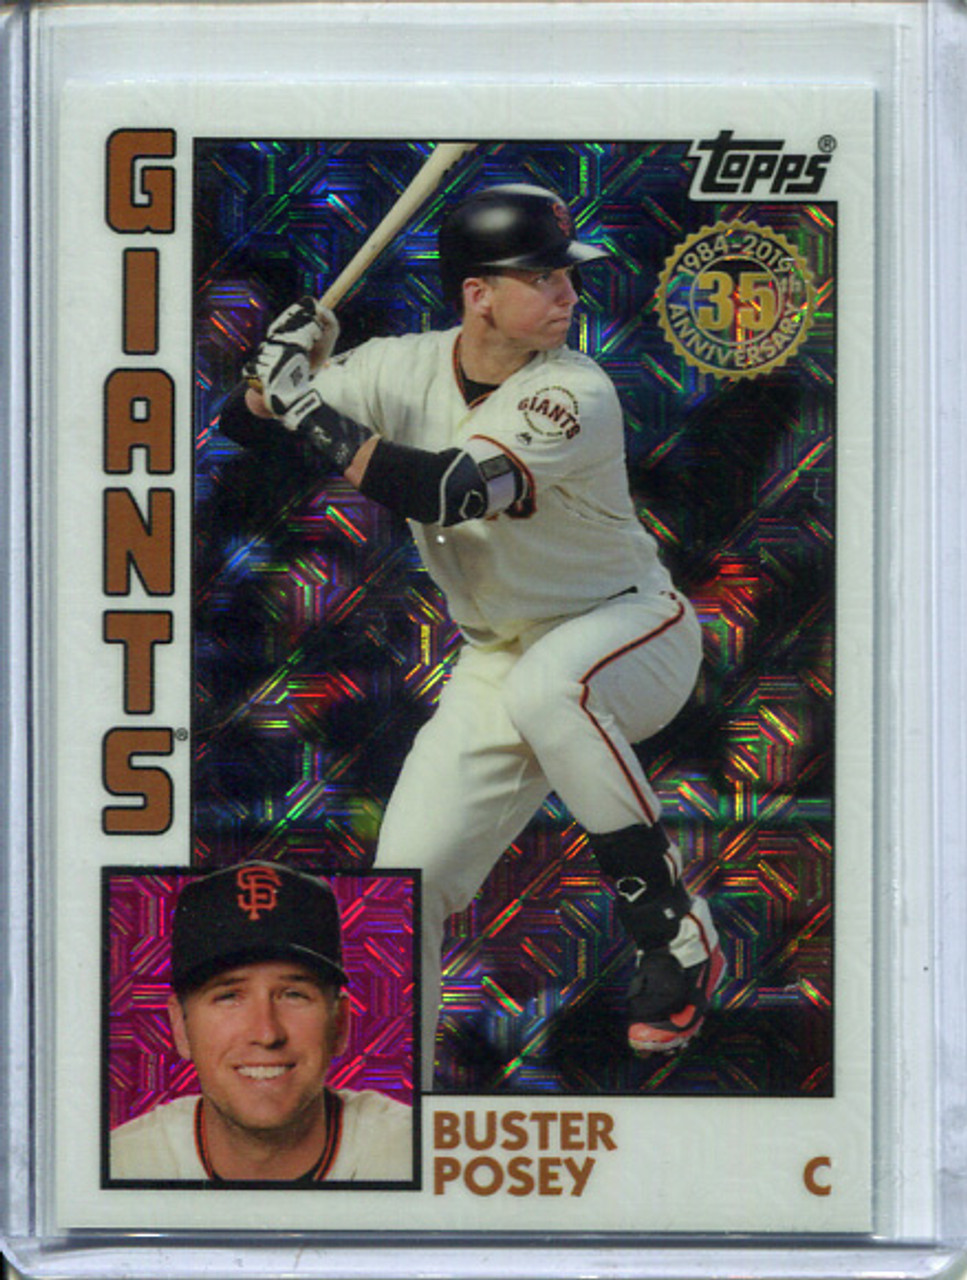 Buster Posey 2019 Topps, '84 Topps Silver Pack Chrome #27